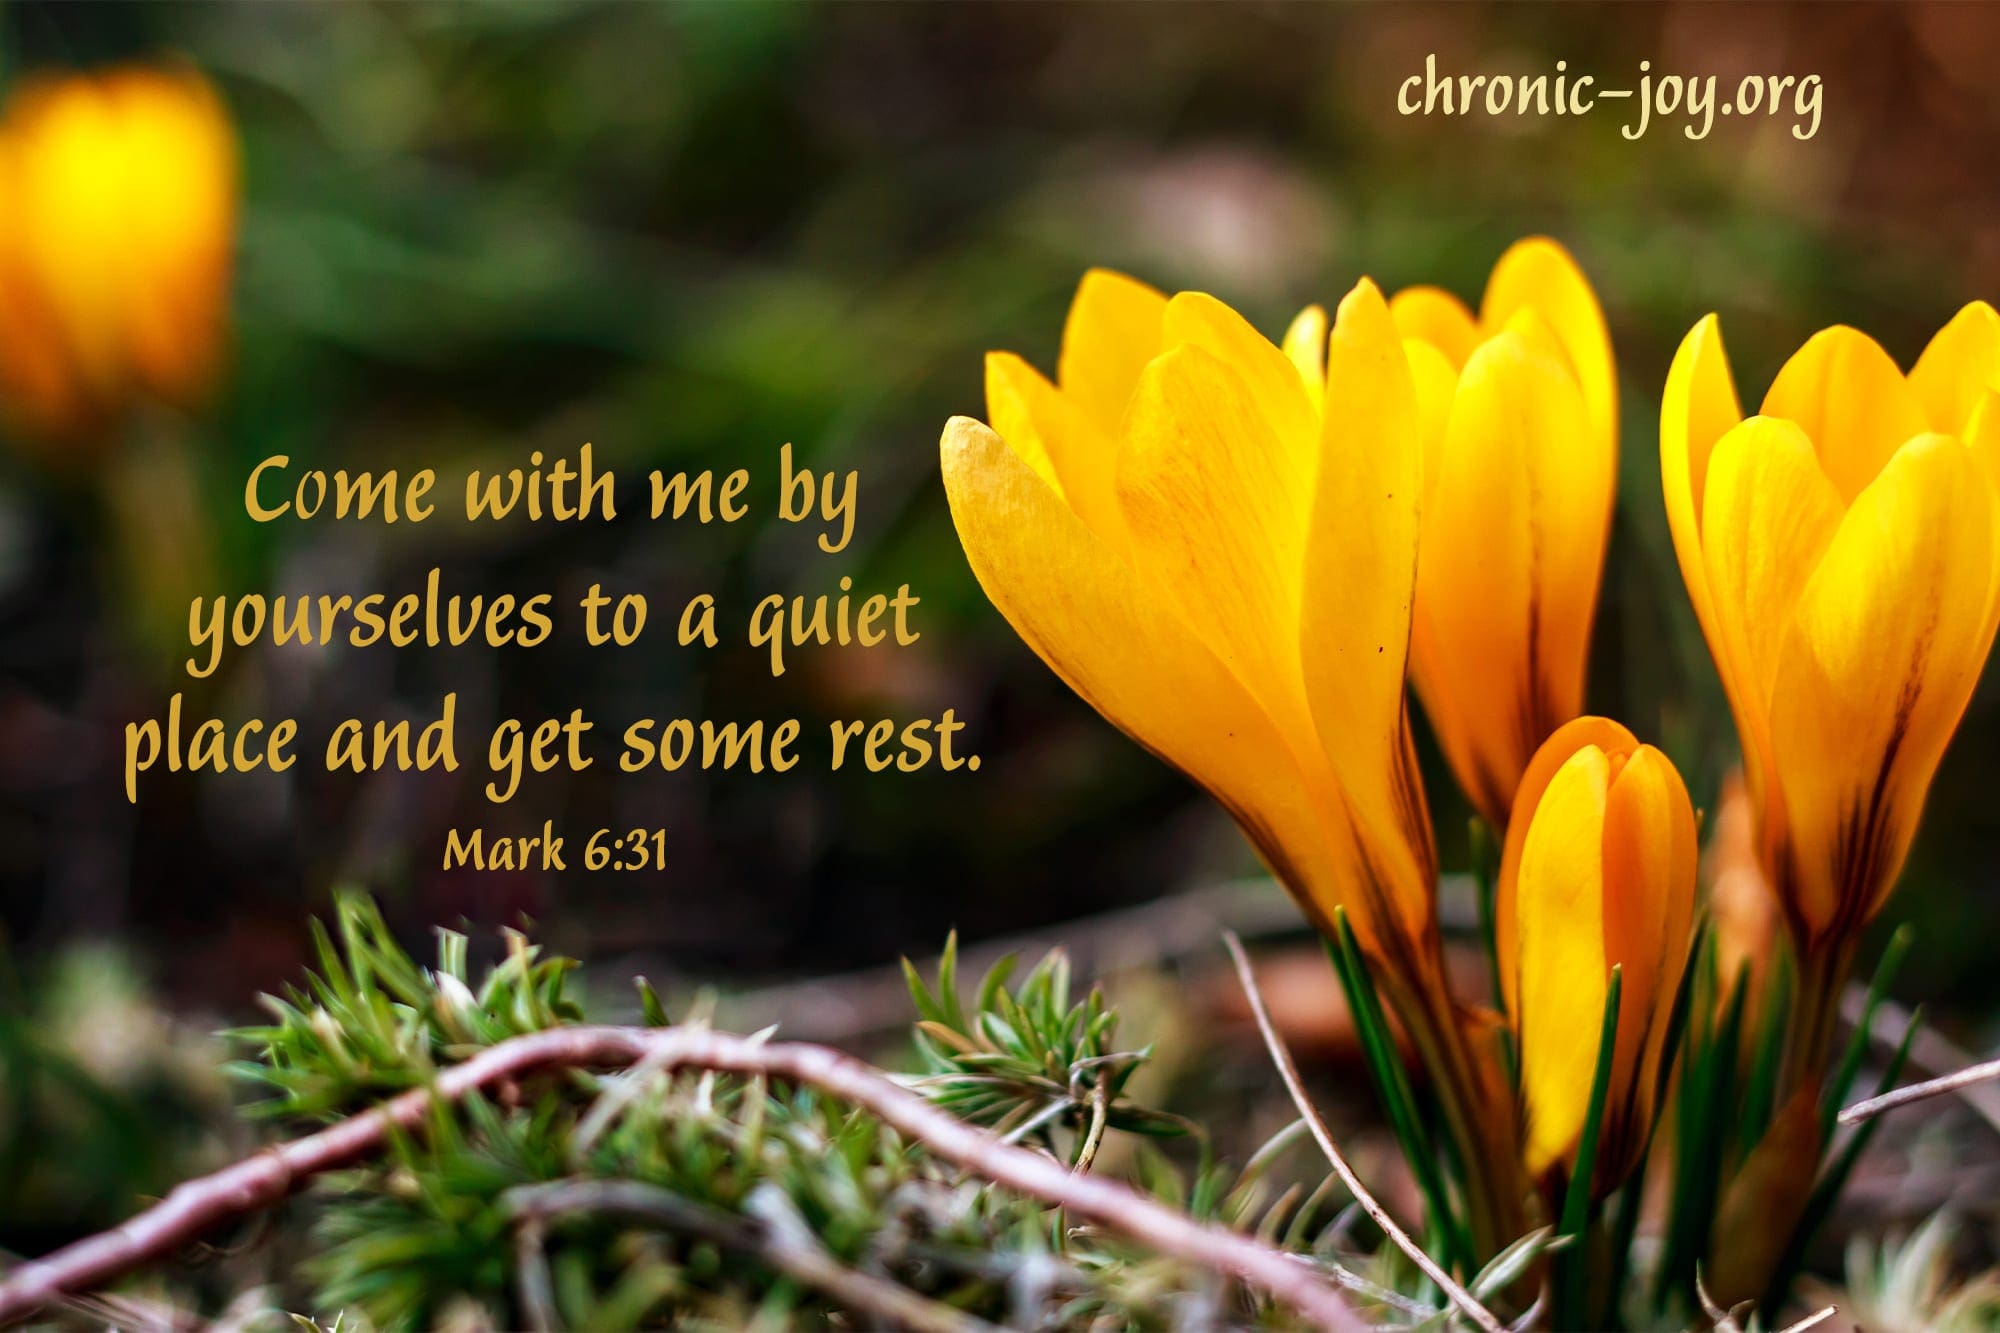 Come with me by yourselves to a quiet place and get some rest. Mark 6:31